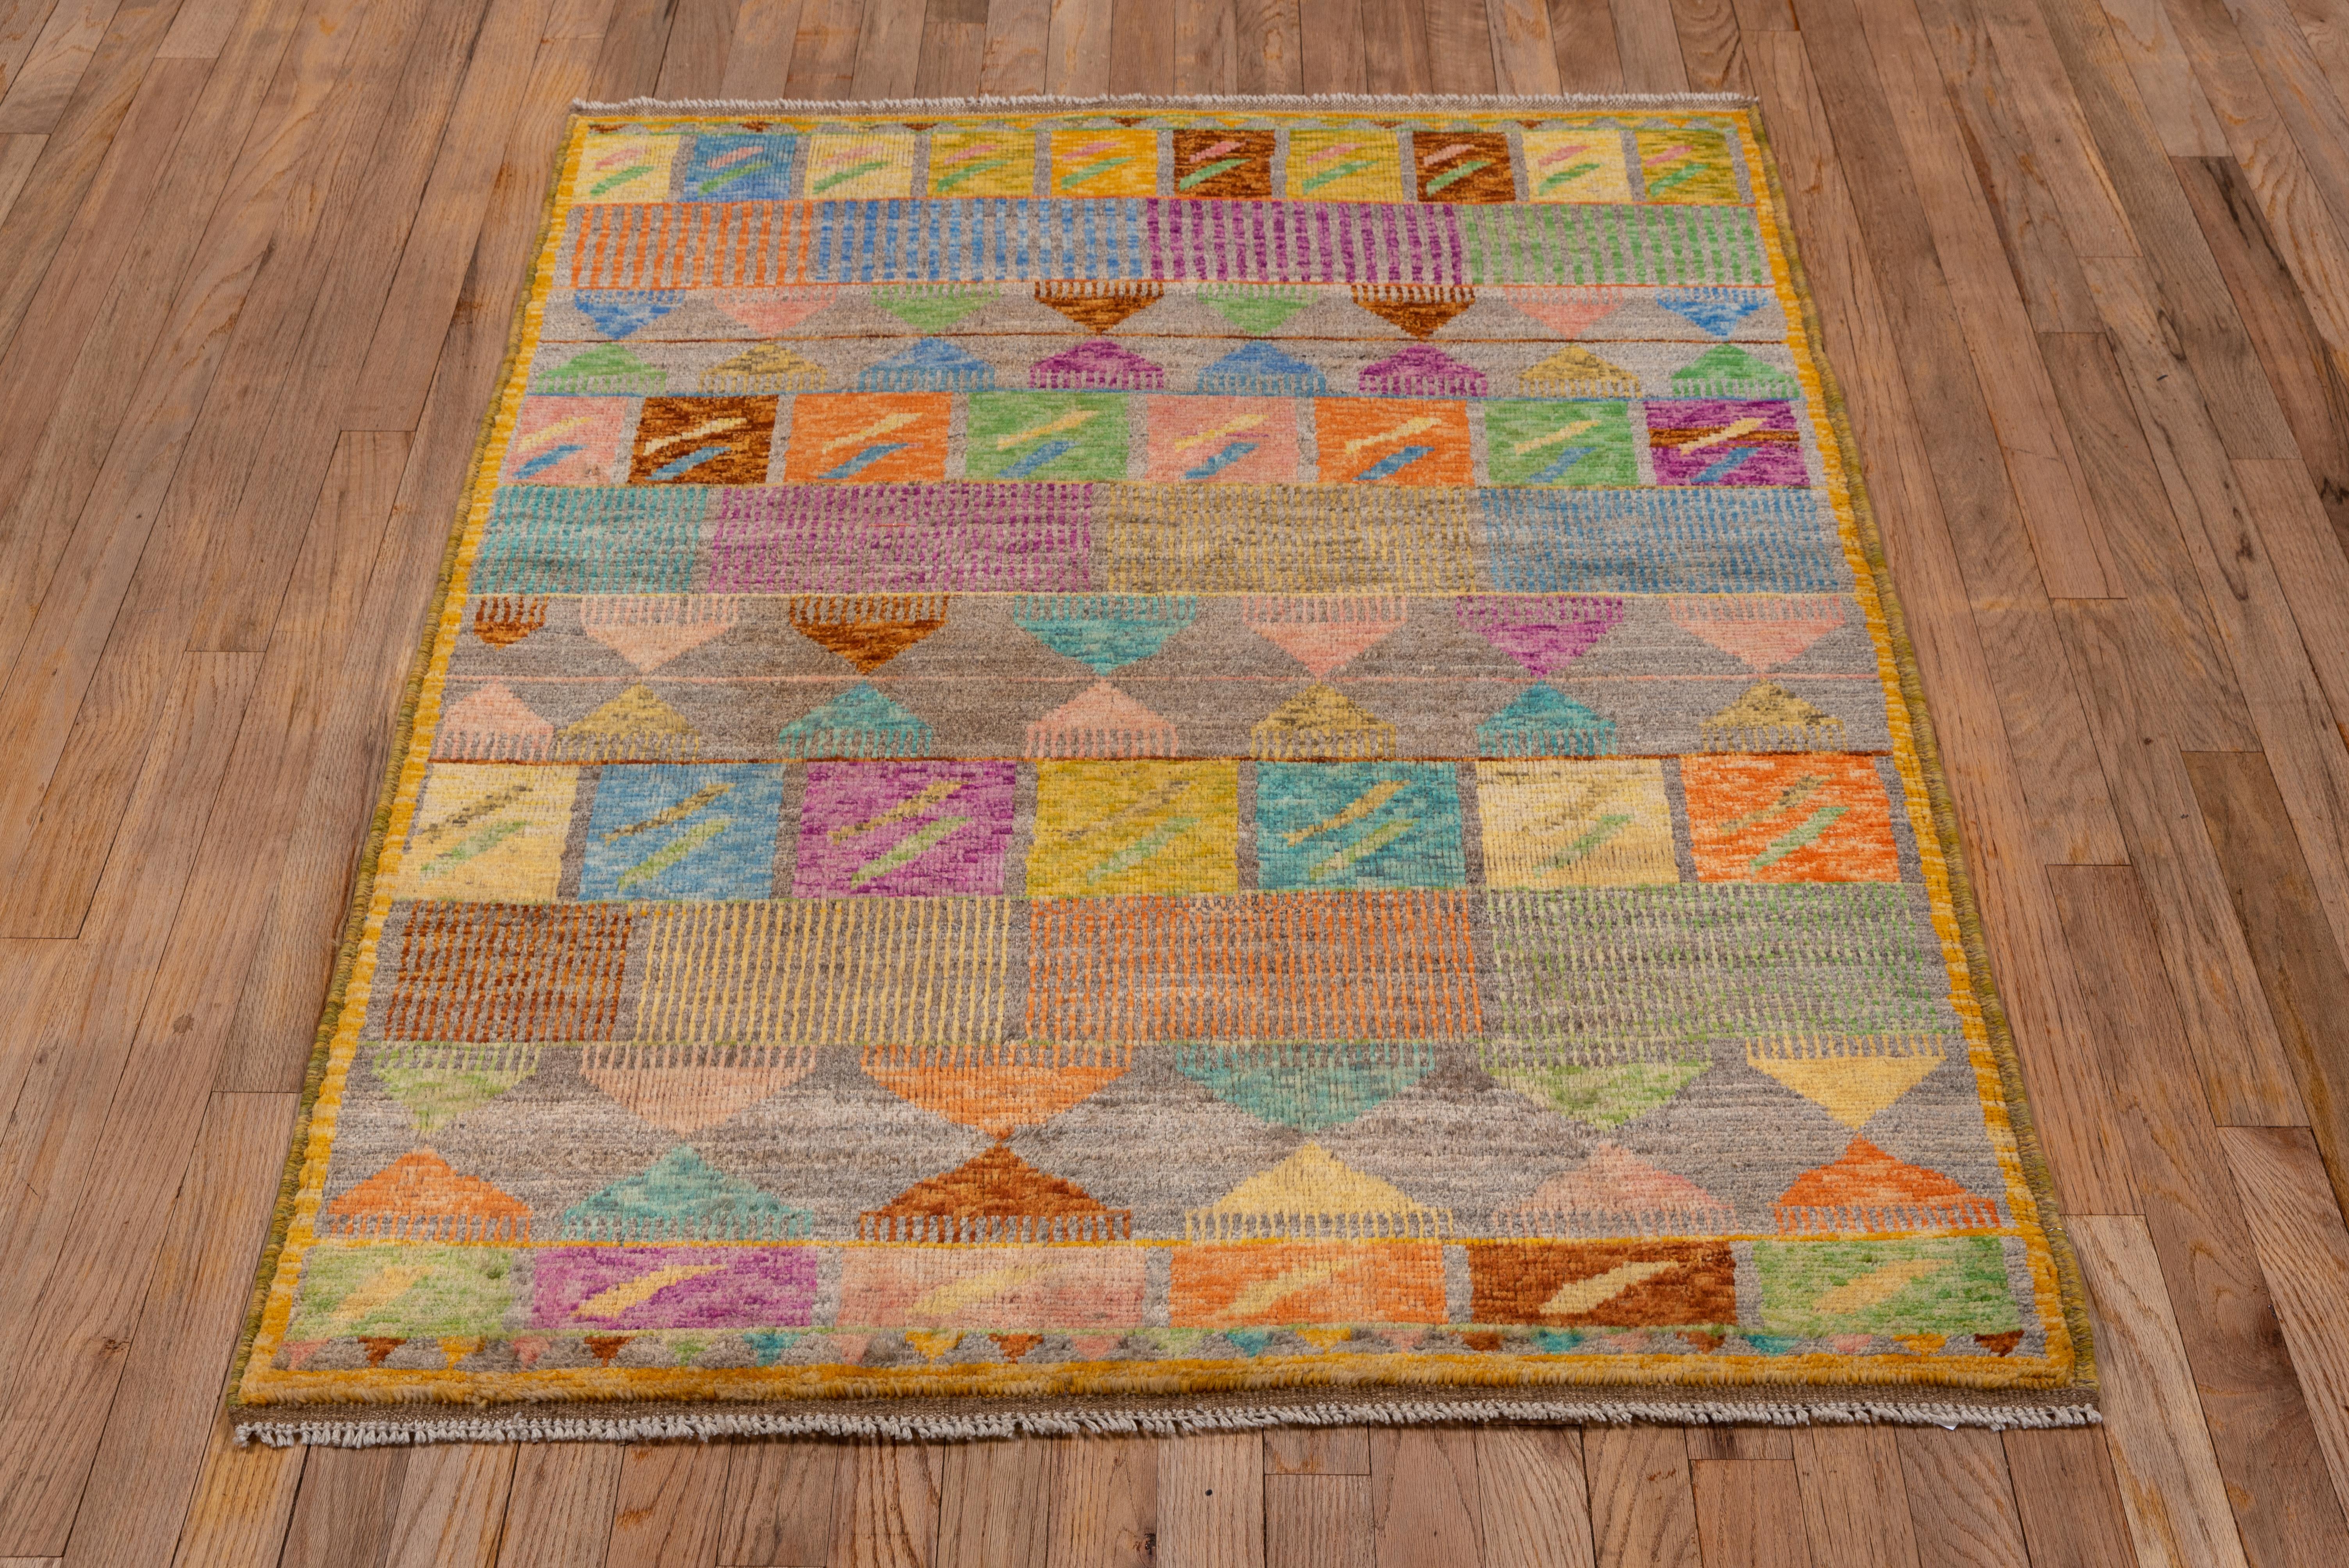 Triangular combs, rectangles with arrays of parallel lines and squares with check marks, form row across this small scatter with a straw to marigold border. The palette tends to the soft side, with abrashed tones of aqua, rust, light and pale blue,